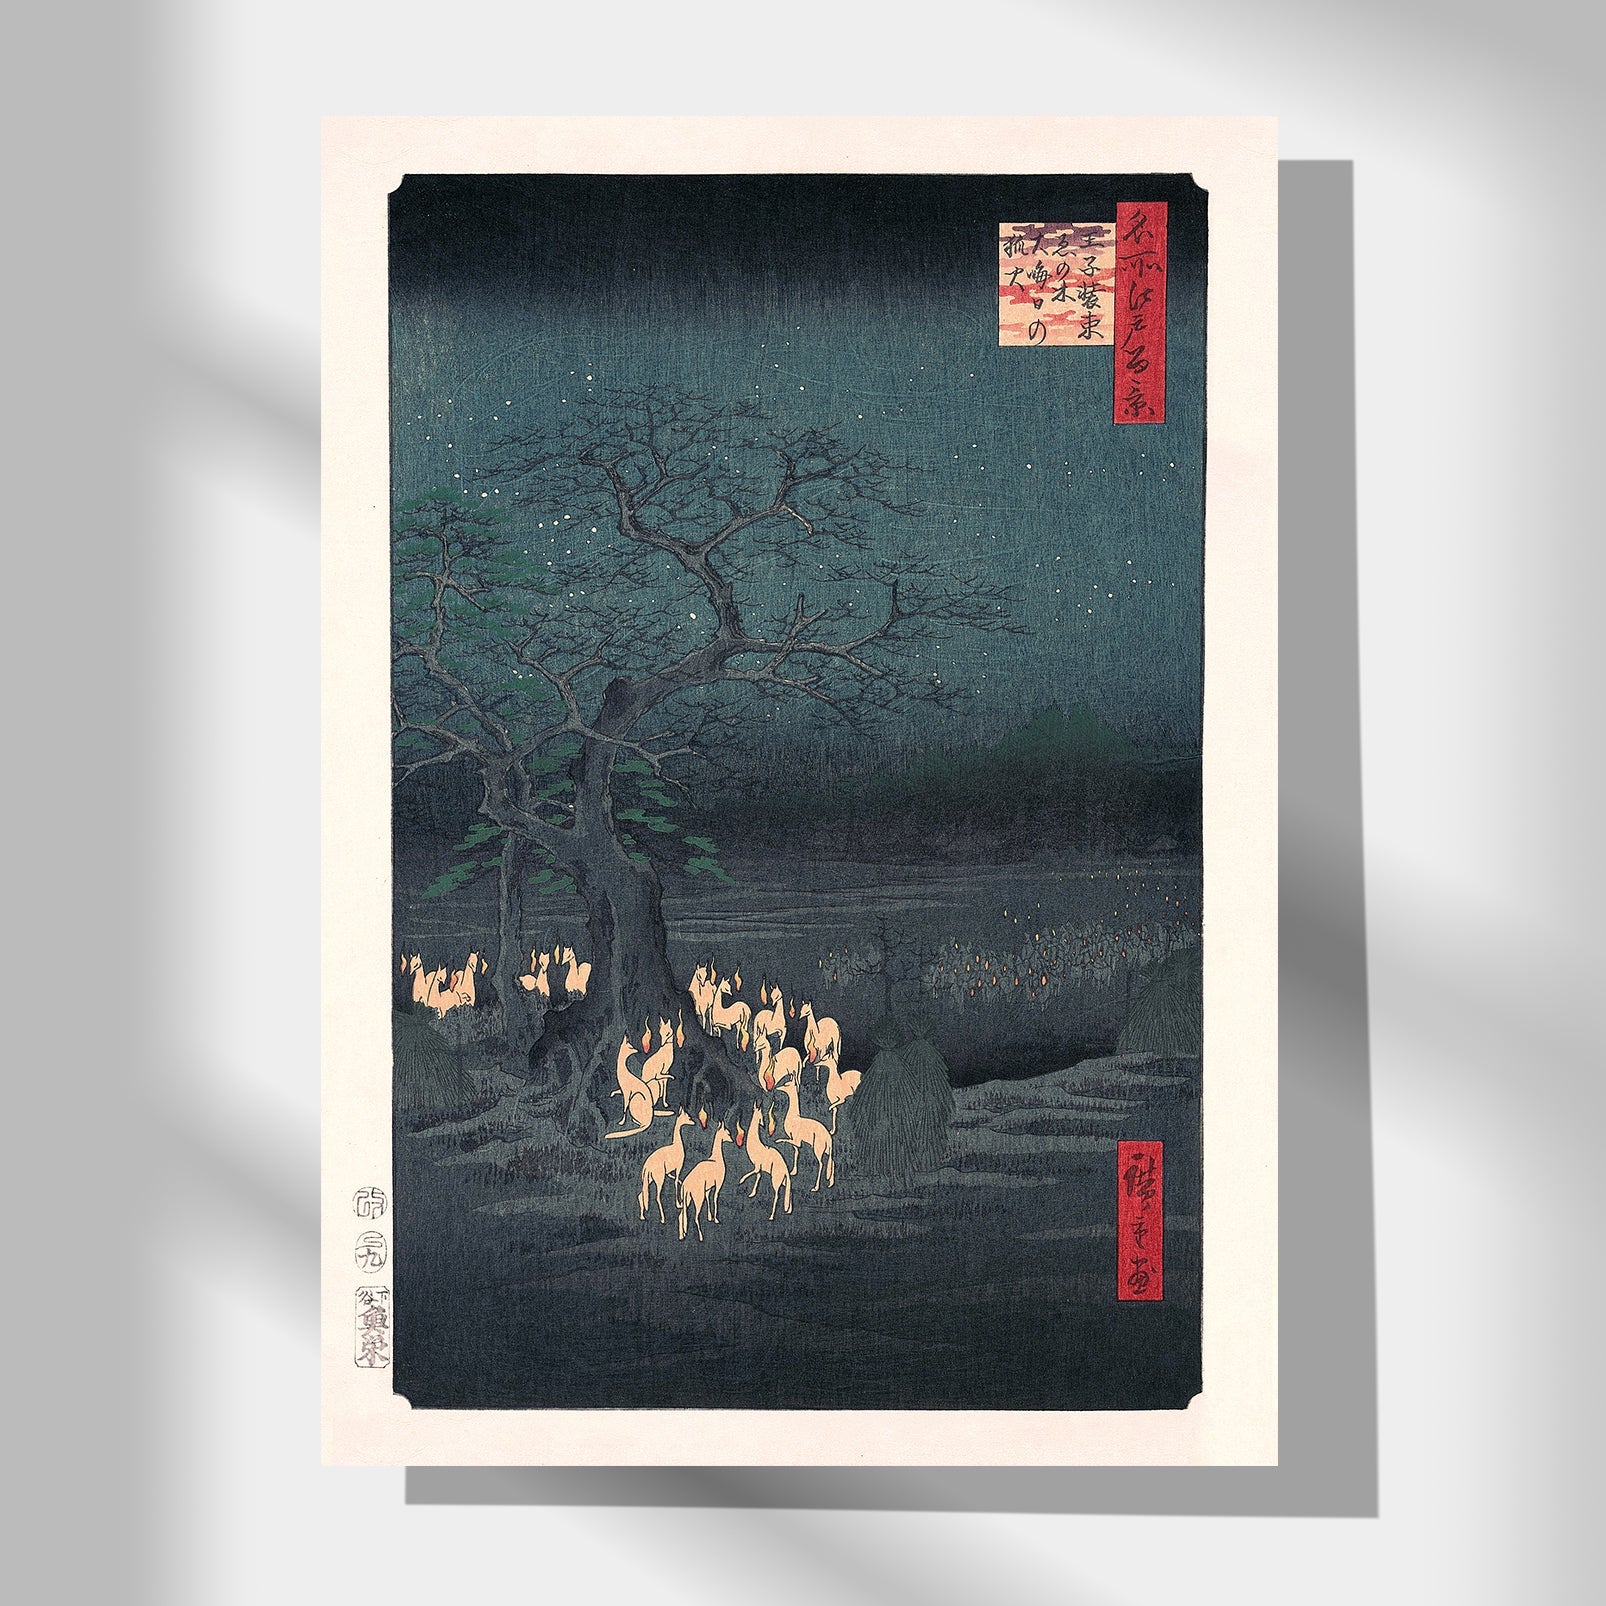 Bestseller Japanese Art Prints & Posters -Japonica Graphic-